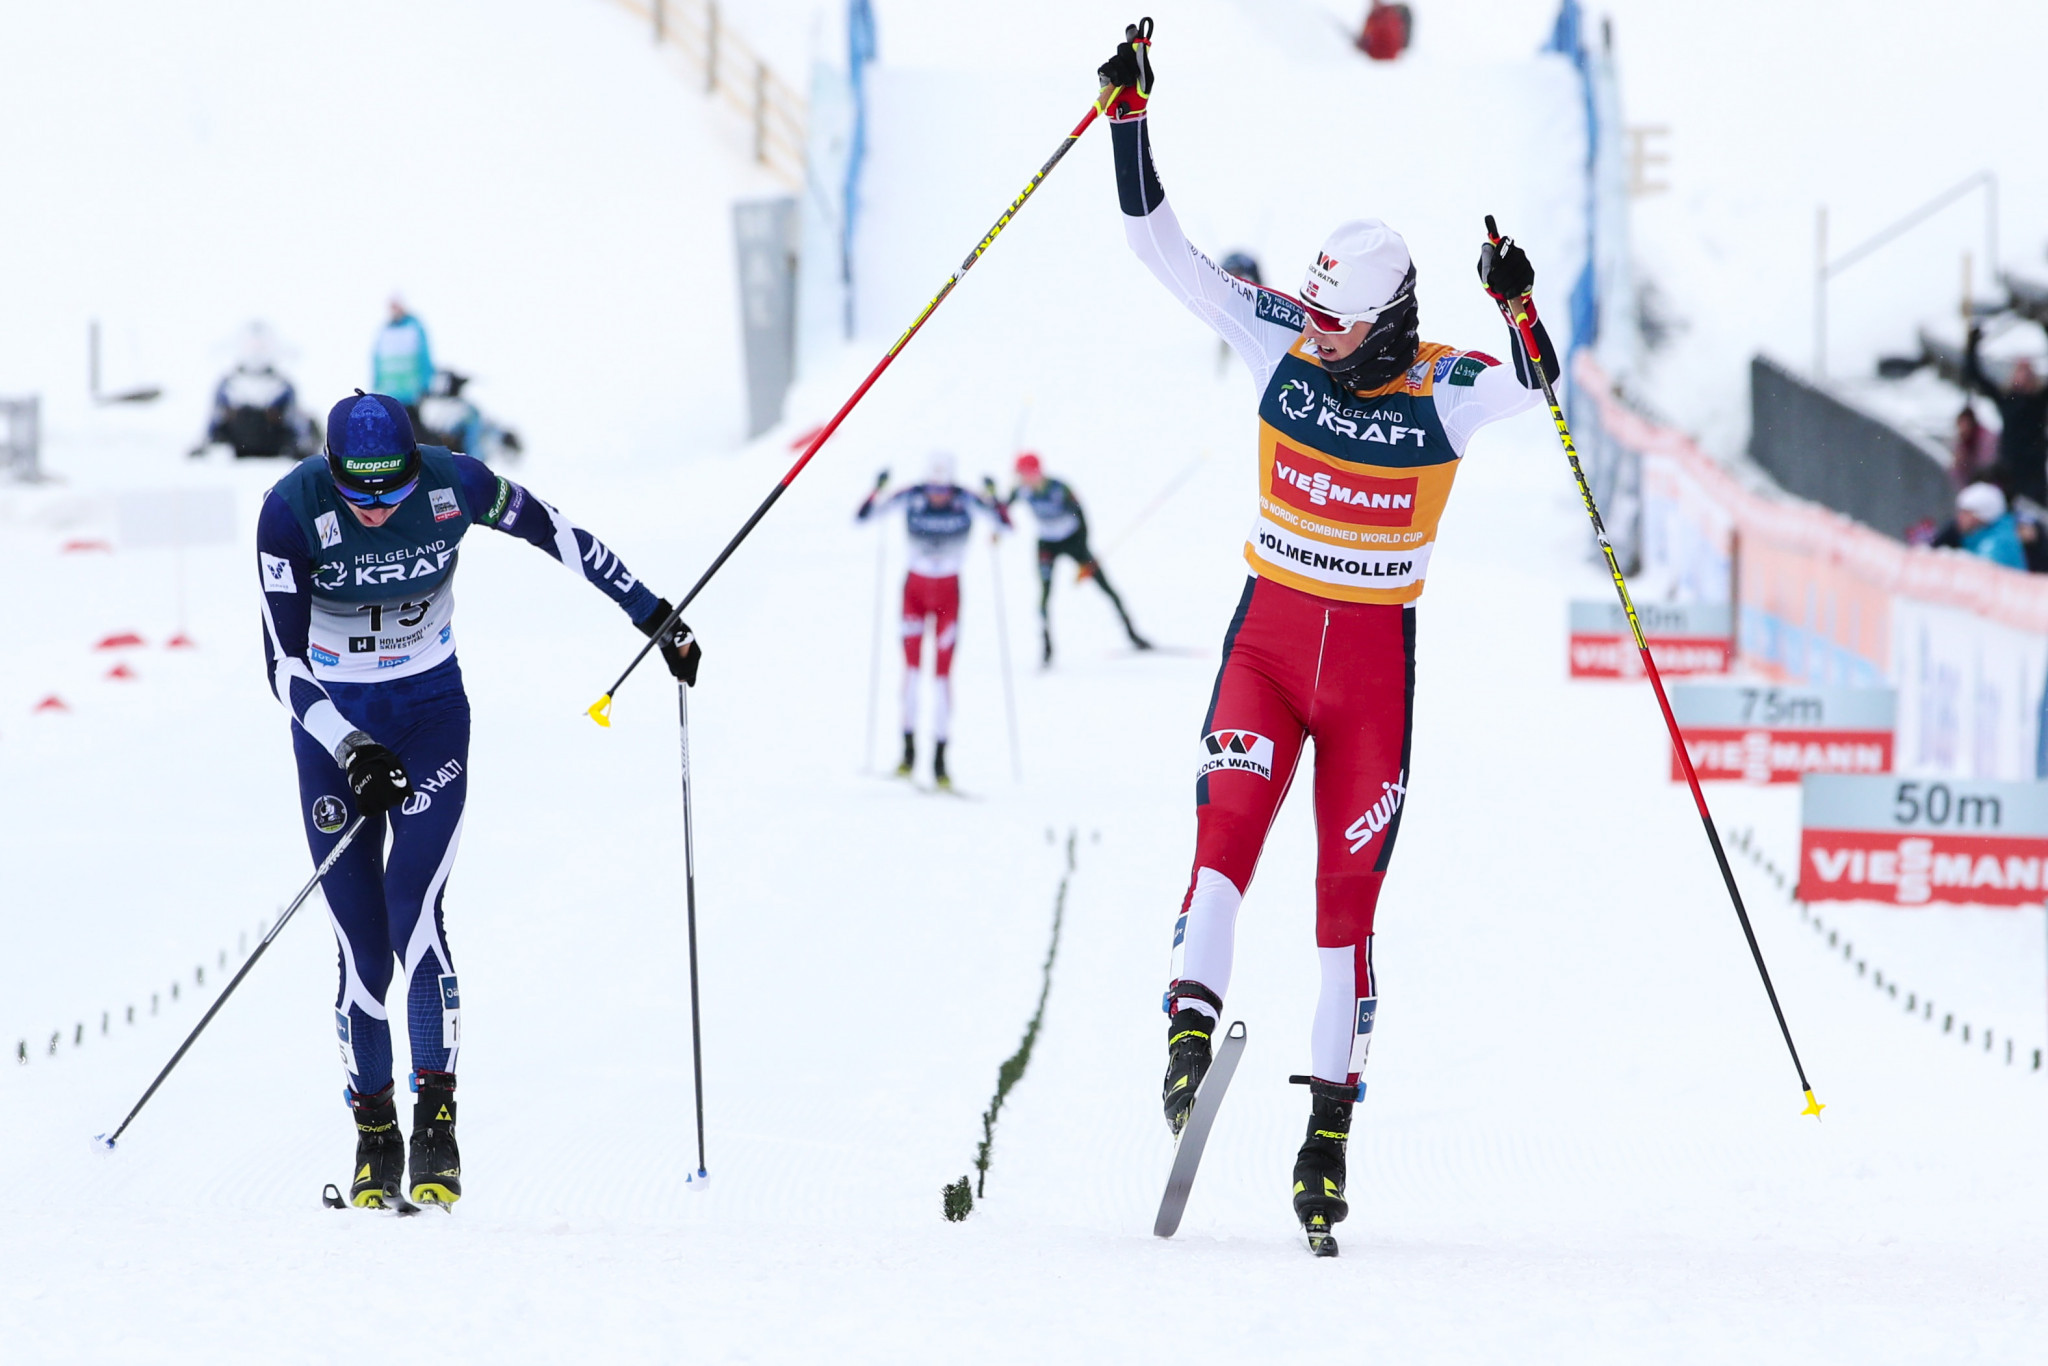 The first draft of the calendar for the 2019-2020 International Ski Federation Nordic Combined World Cup season has been unveiled ©Getty Images